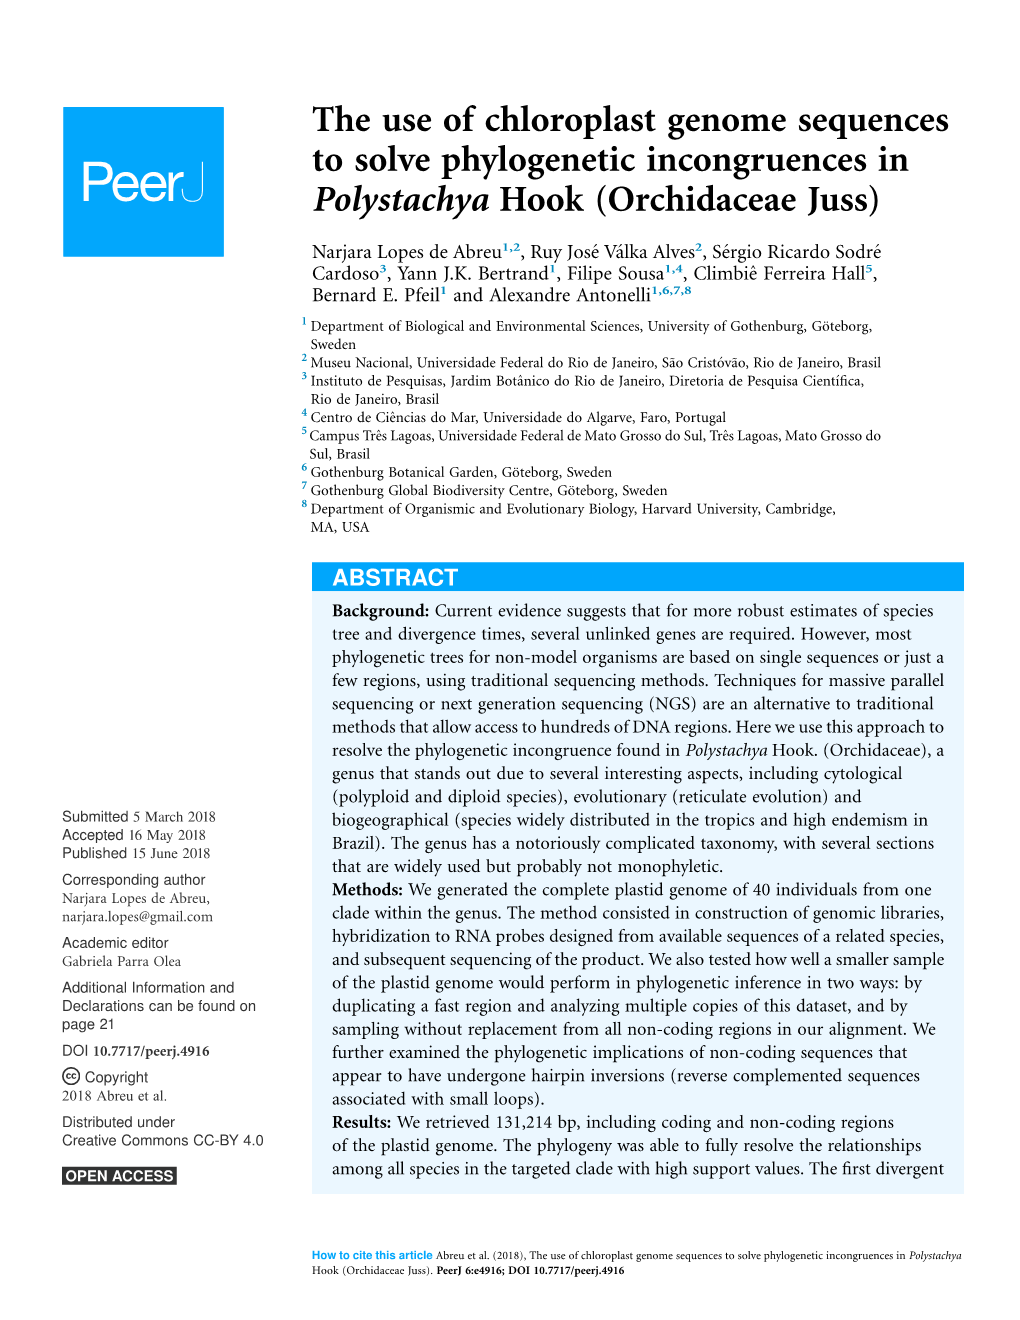 The Use of Chloroplast Genome Sequences to Solve Phylogenetic Incongruences in Polystachya Hook (Orchidaceae Juss)